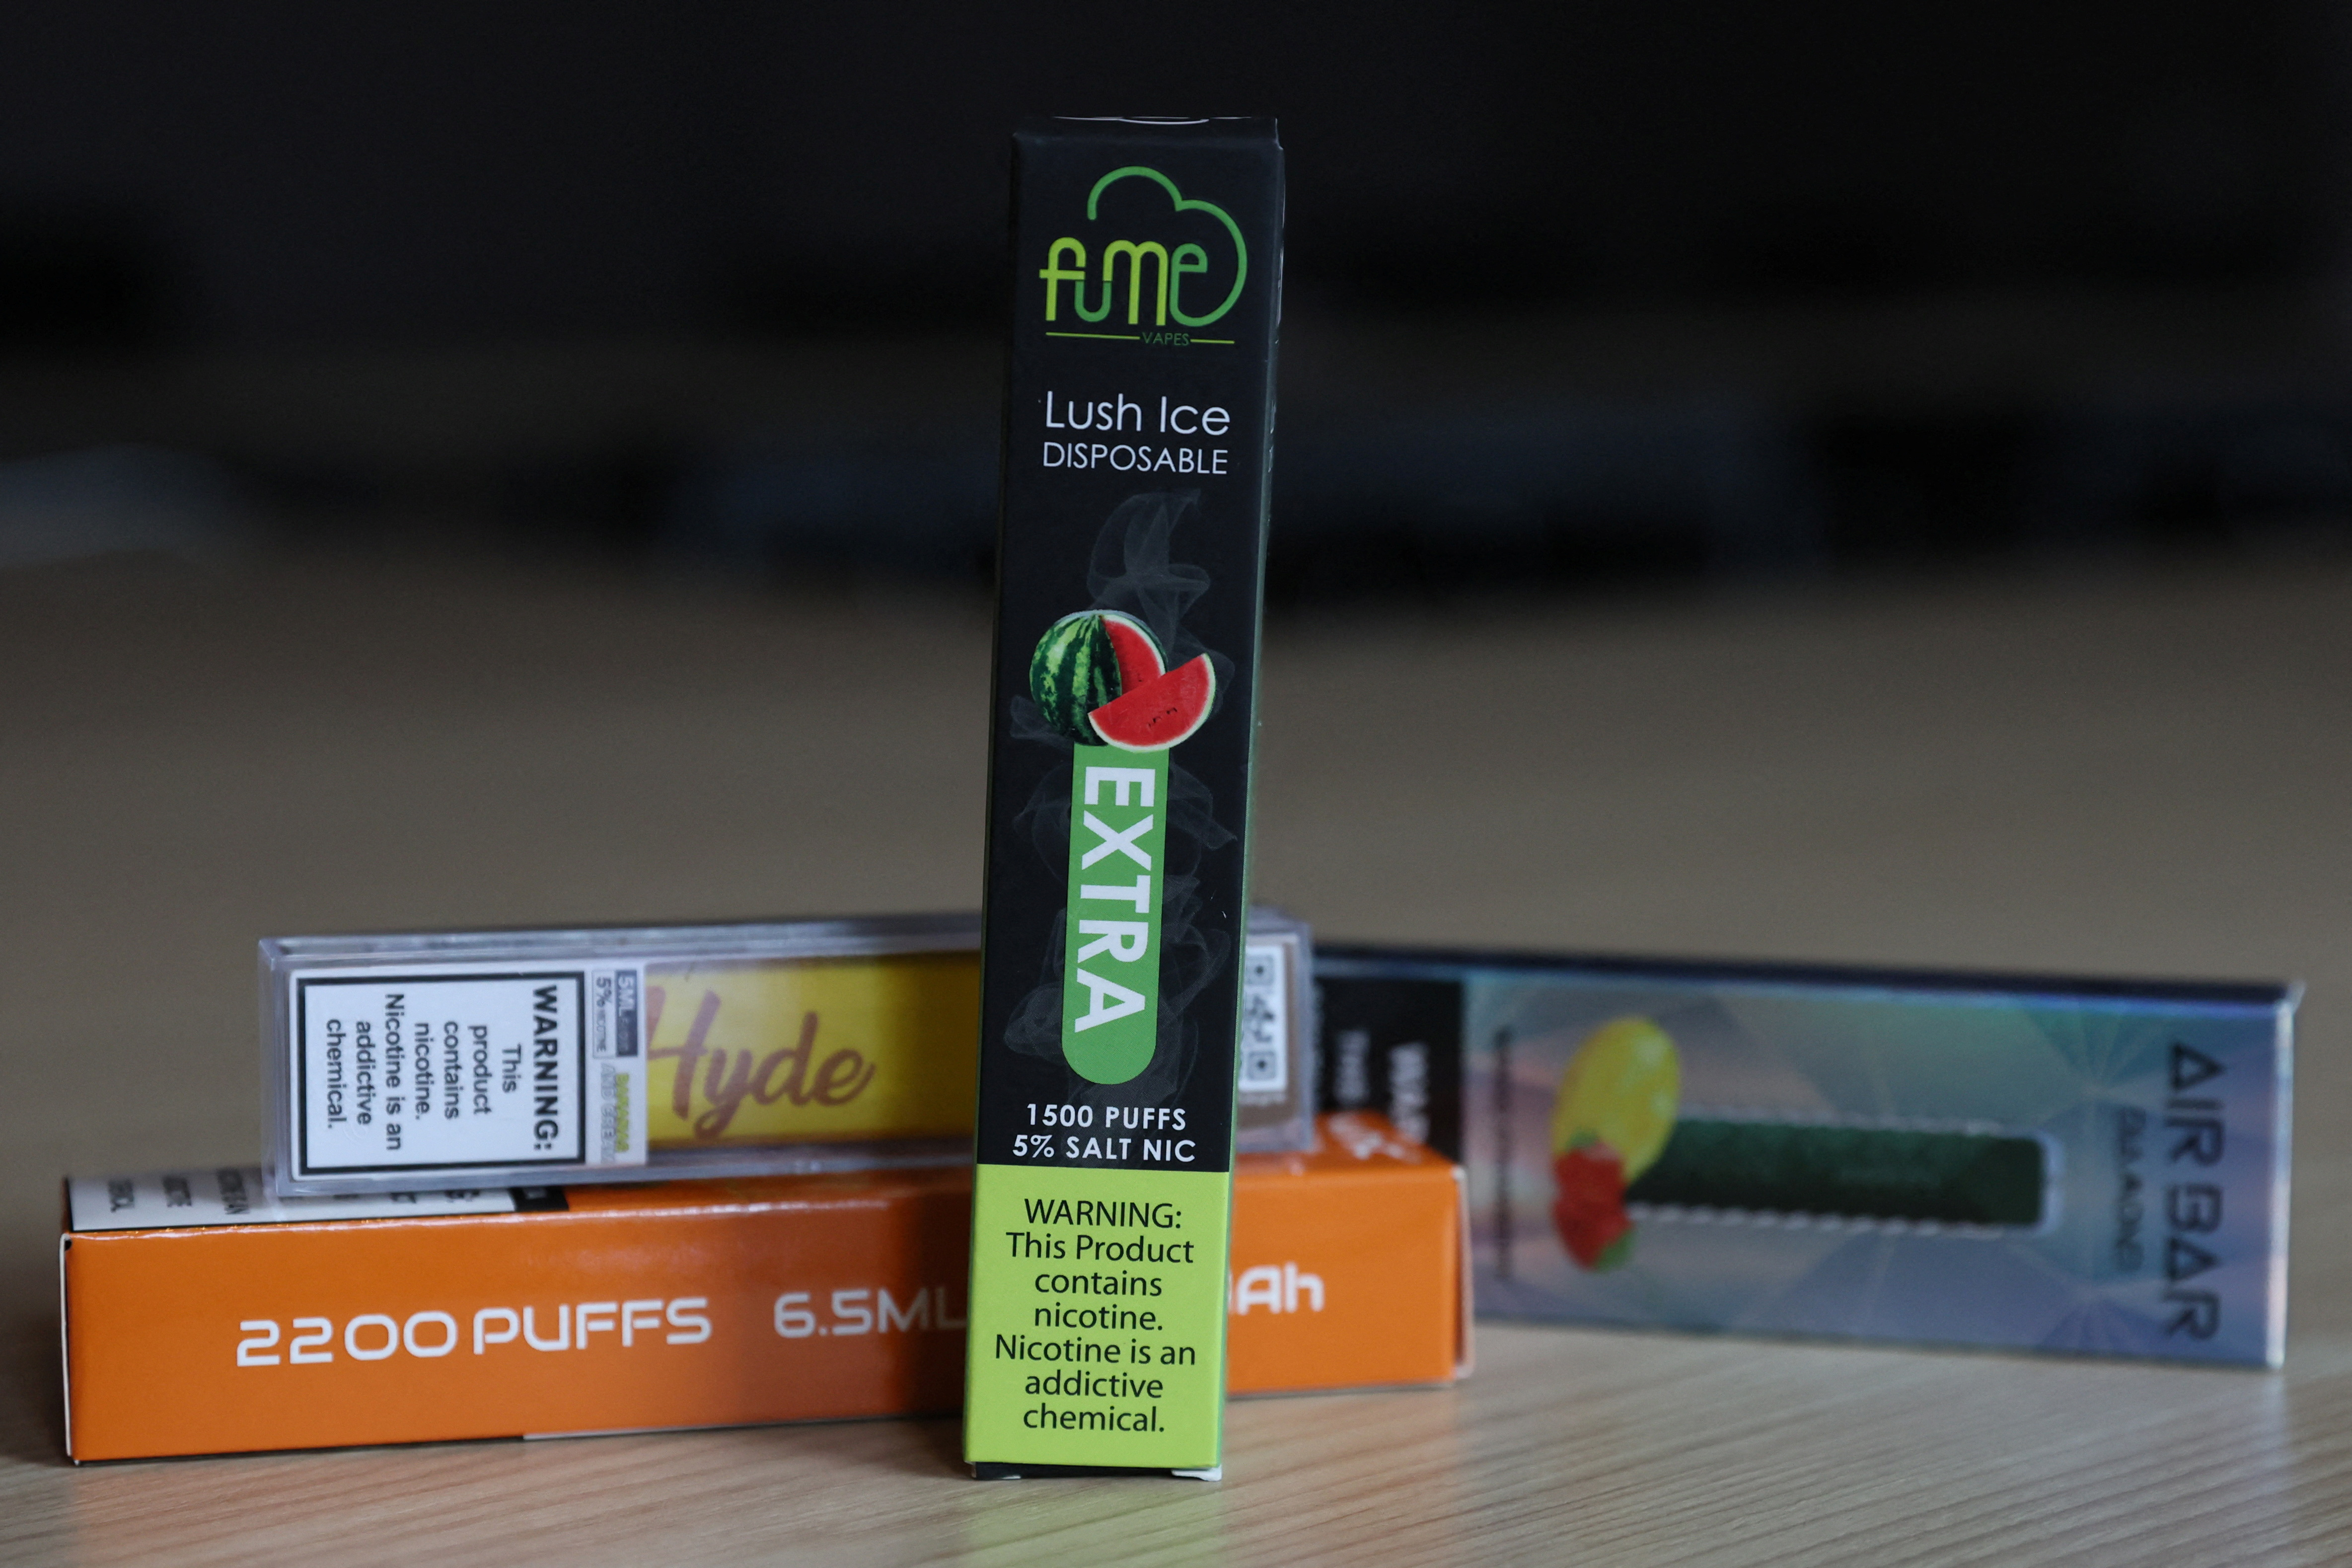 New ‘Candy' e-cigs catch fire after U.S. regulators stamp out Juul's flavors